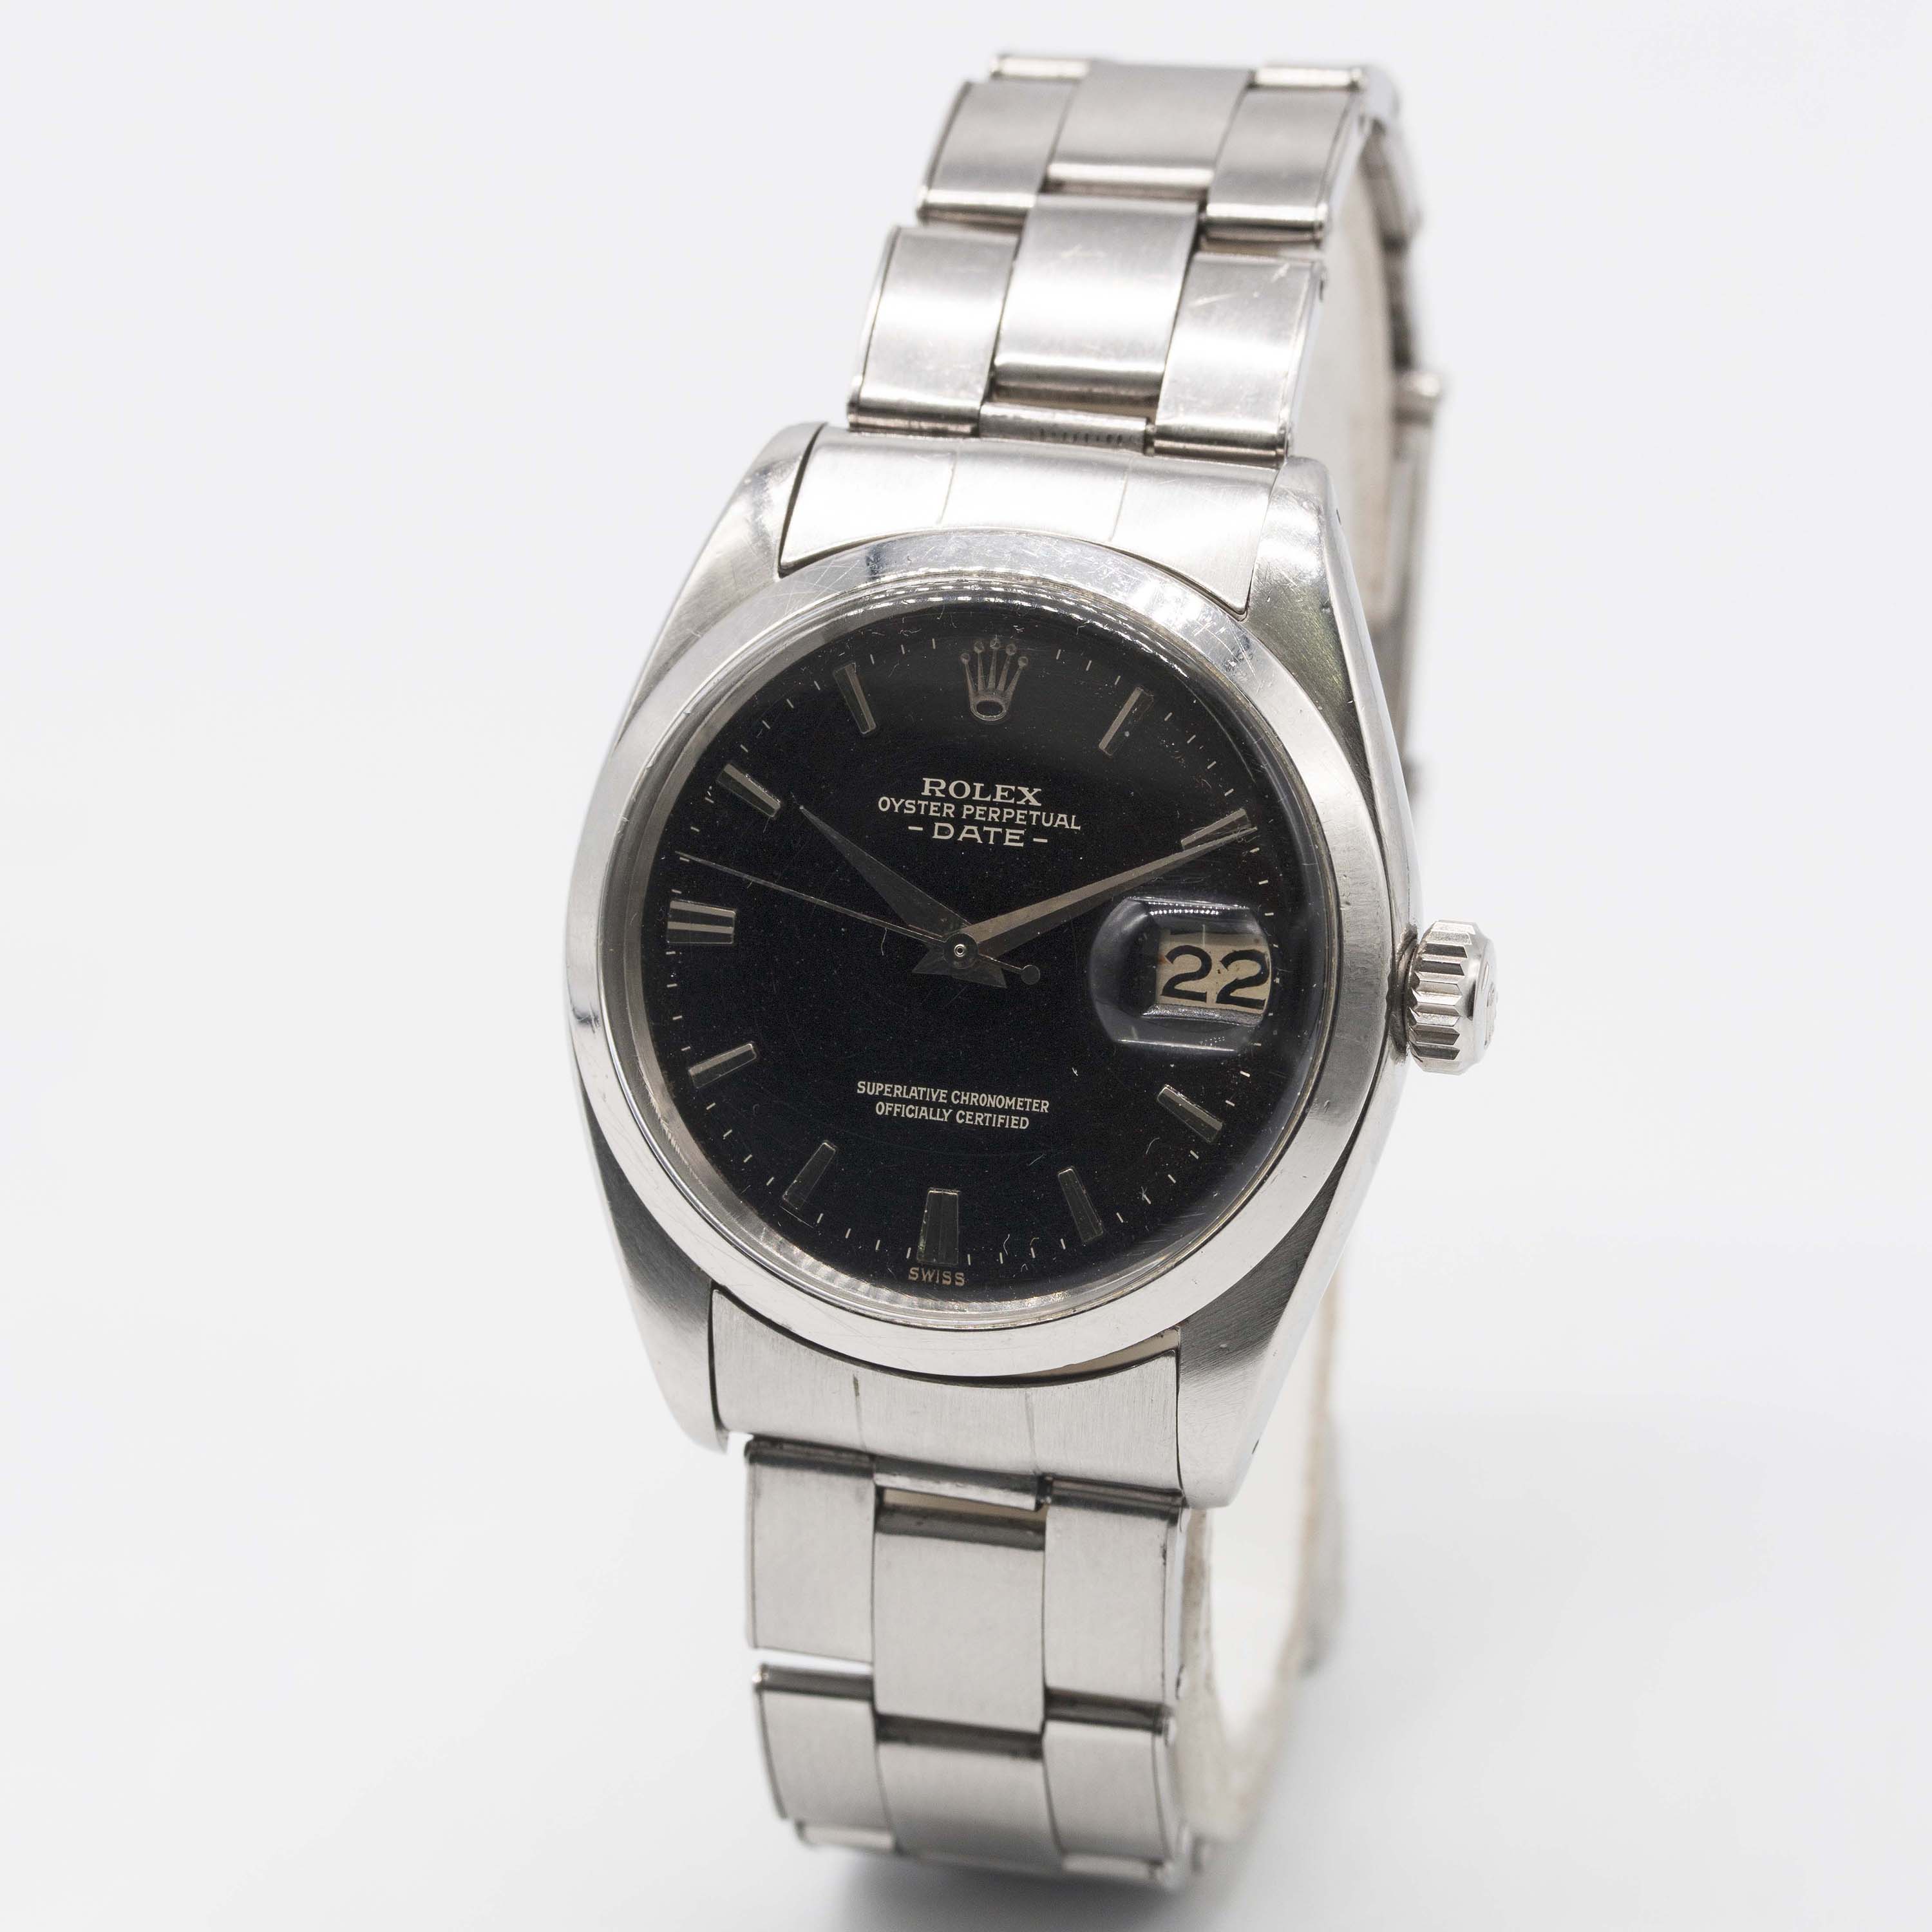 A GENTLEMAN'S STAINLESS STEEL ROLEX OYSTER PERPETUAL DATE BRACELET WATCH CIRCA 1961, REF. 1500 GLOSS - Image 4 of 12